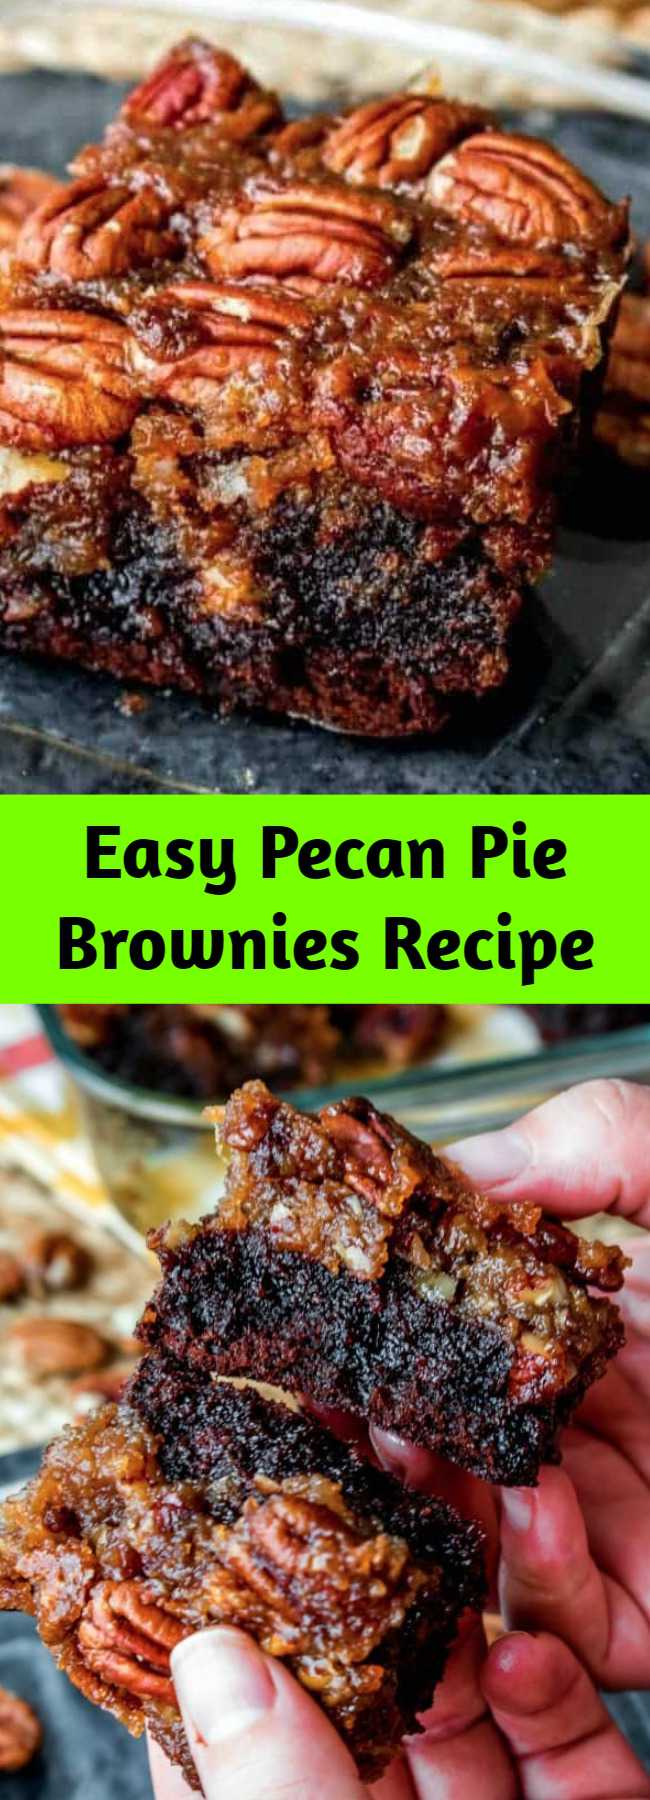 Easy Pecan Pie Brownies Recipe - These Pecan Pie Brownies are a chocolaty twist on the traditional pecan pie! They make a great Thanksgiving dessert but I like making them all year long!